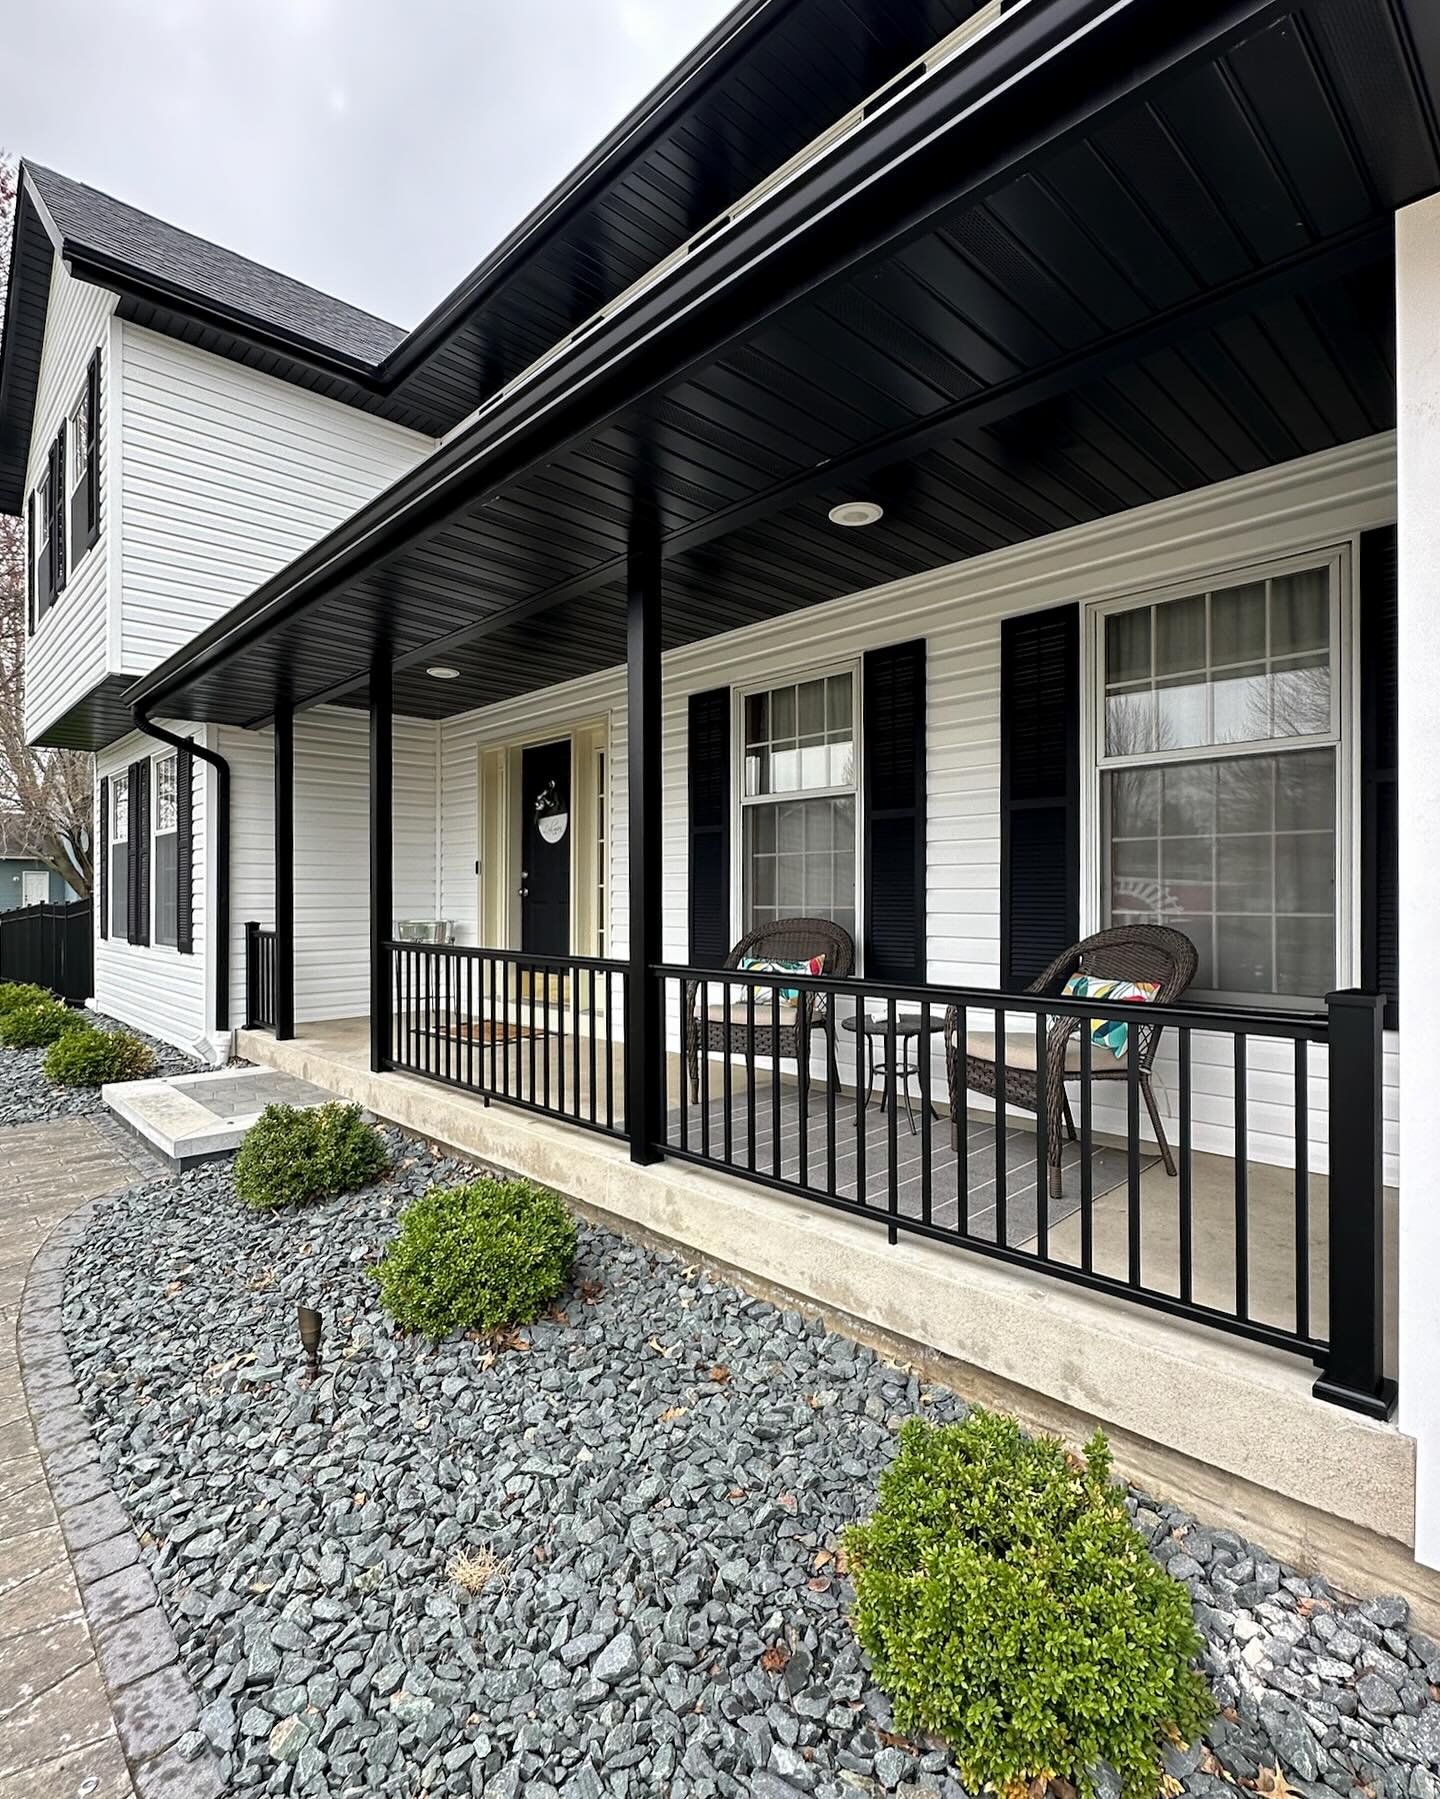 A front porch refresh is one of our favorite jobs to complete!

Look at the difference you can achieve by simply updating the porch railing and wrapping the support posts! Quick and easy and makes a big impact!
.
.
.
#frontporch #refresh #postwrap #p